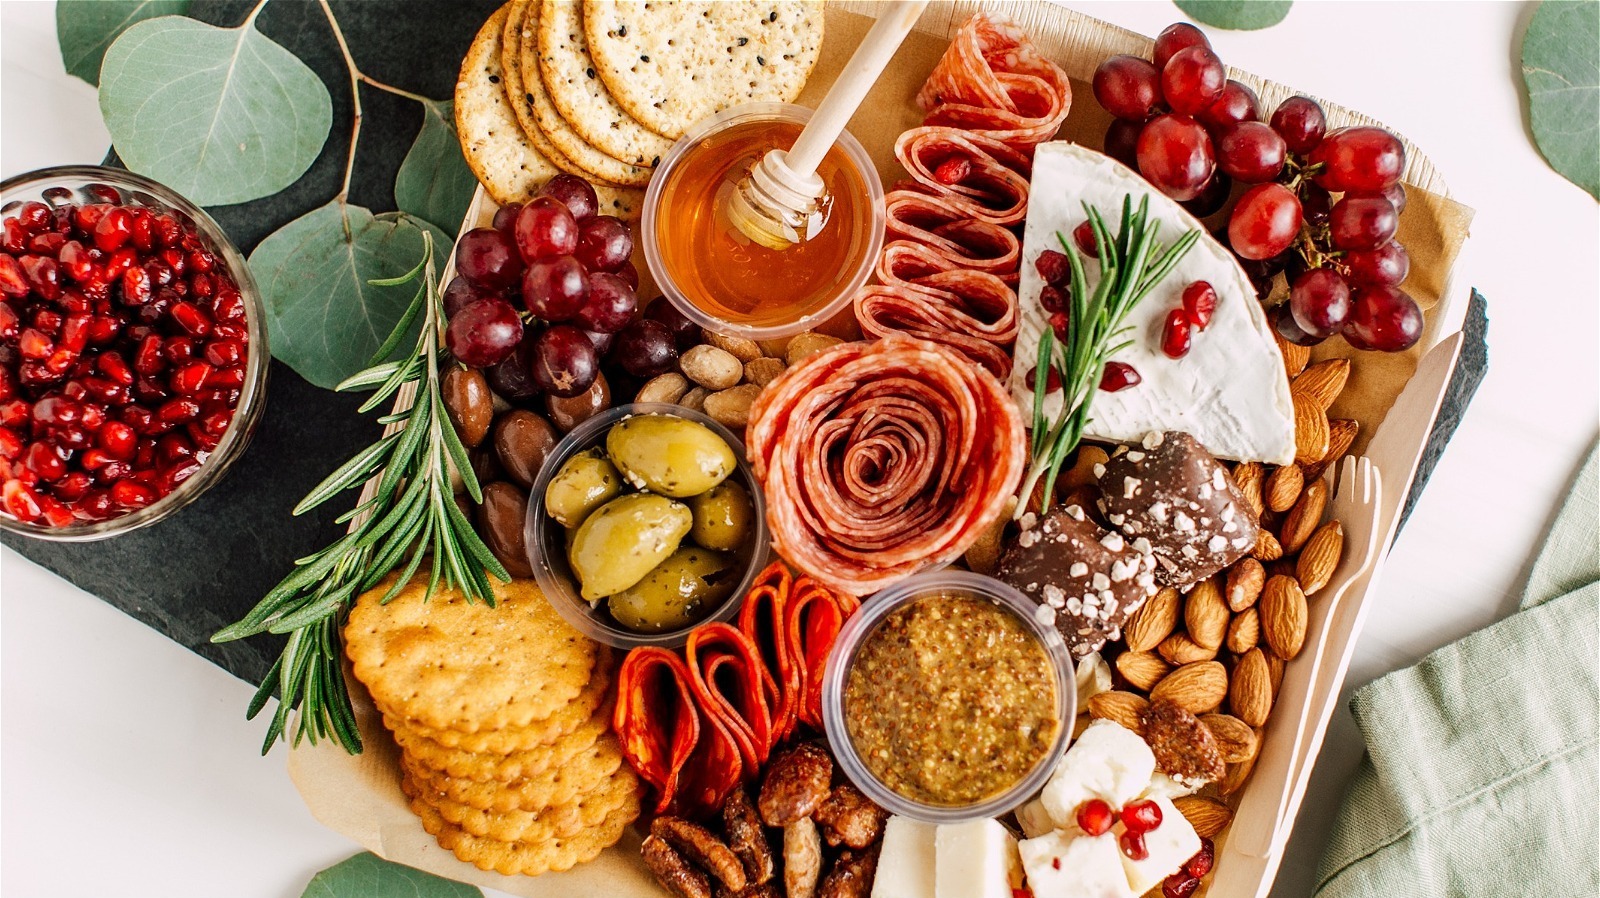 How to Build a Charcuterie Board - Pampered Chef Blog